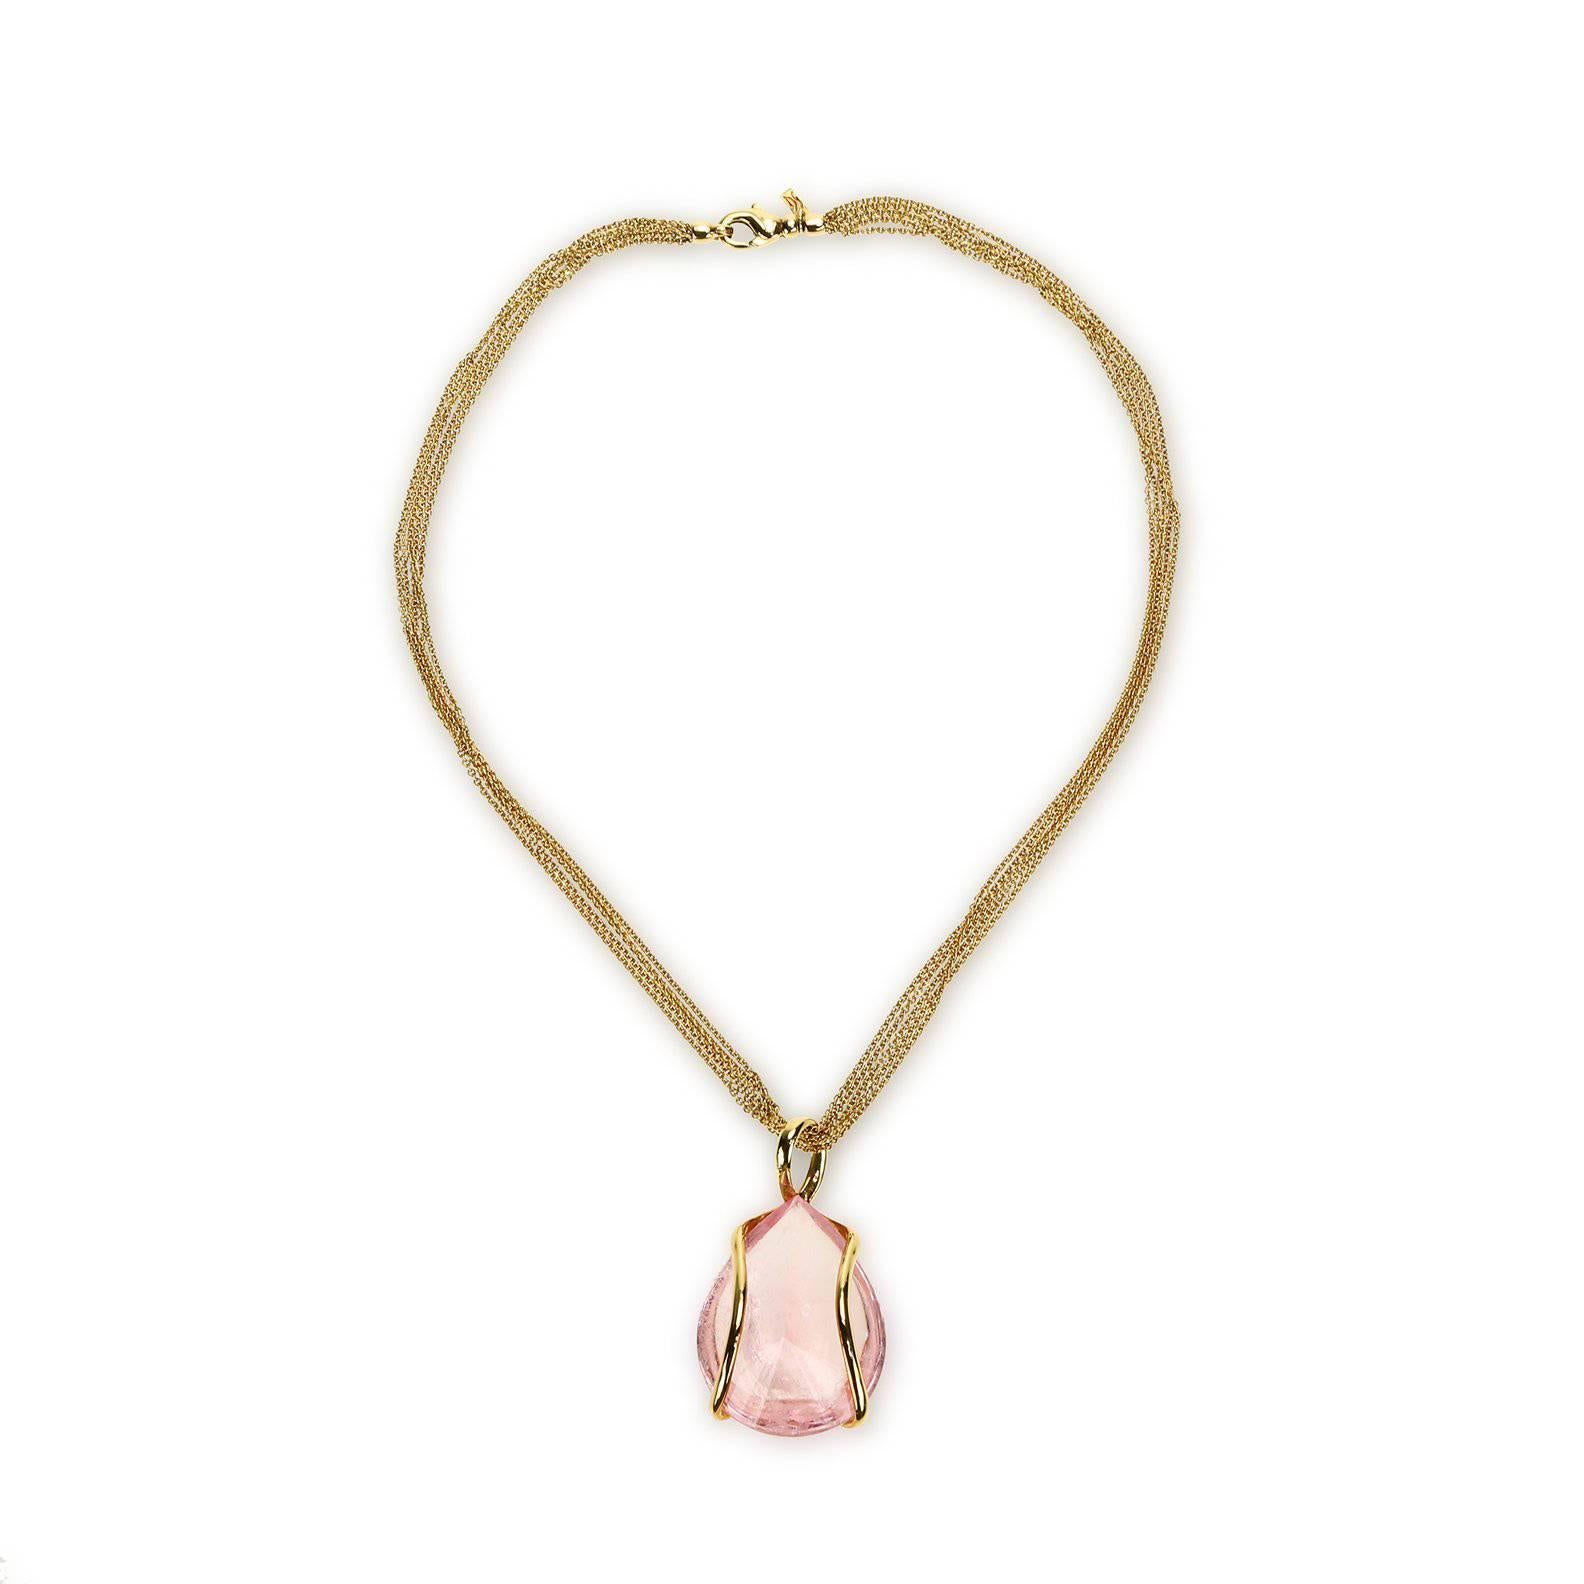 A "Samuel Getz" 18 Karat Yellow Gold Freestyle Pendant Featuring a Large Pear Shape Mirror Buff Cut Morganite, 109.49 Carats [39.26 x 30.63 x 18.84 mm.]. The Pendant is suspended on an 18 Karat Yellow Gold, 18 Inch, 5 Strand, Round Cable